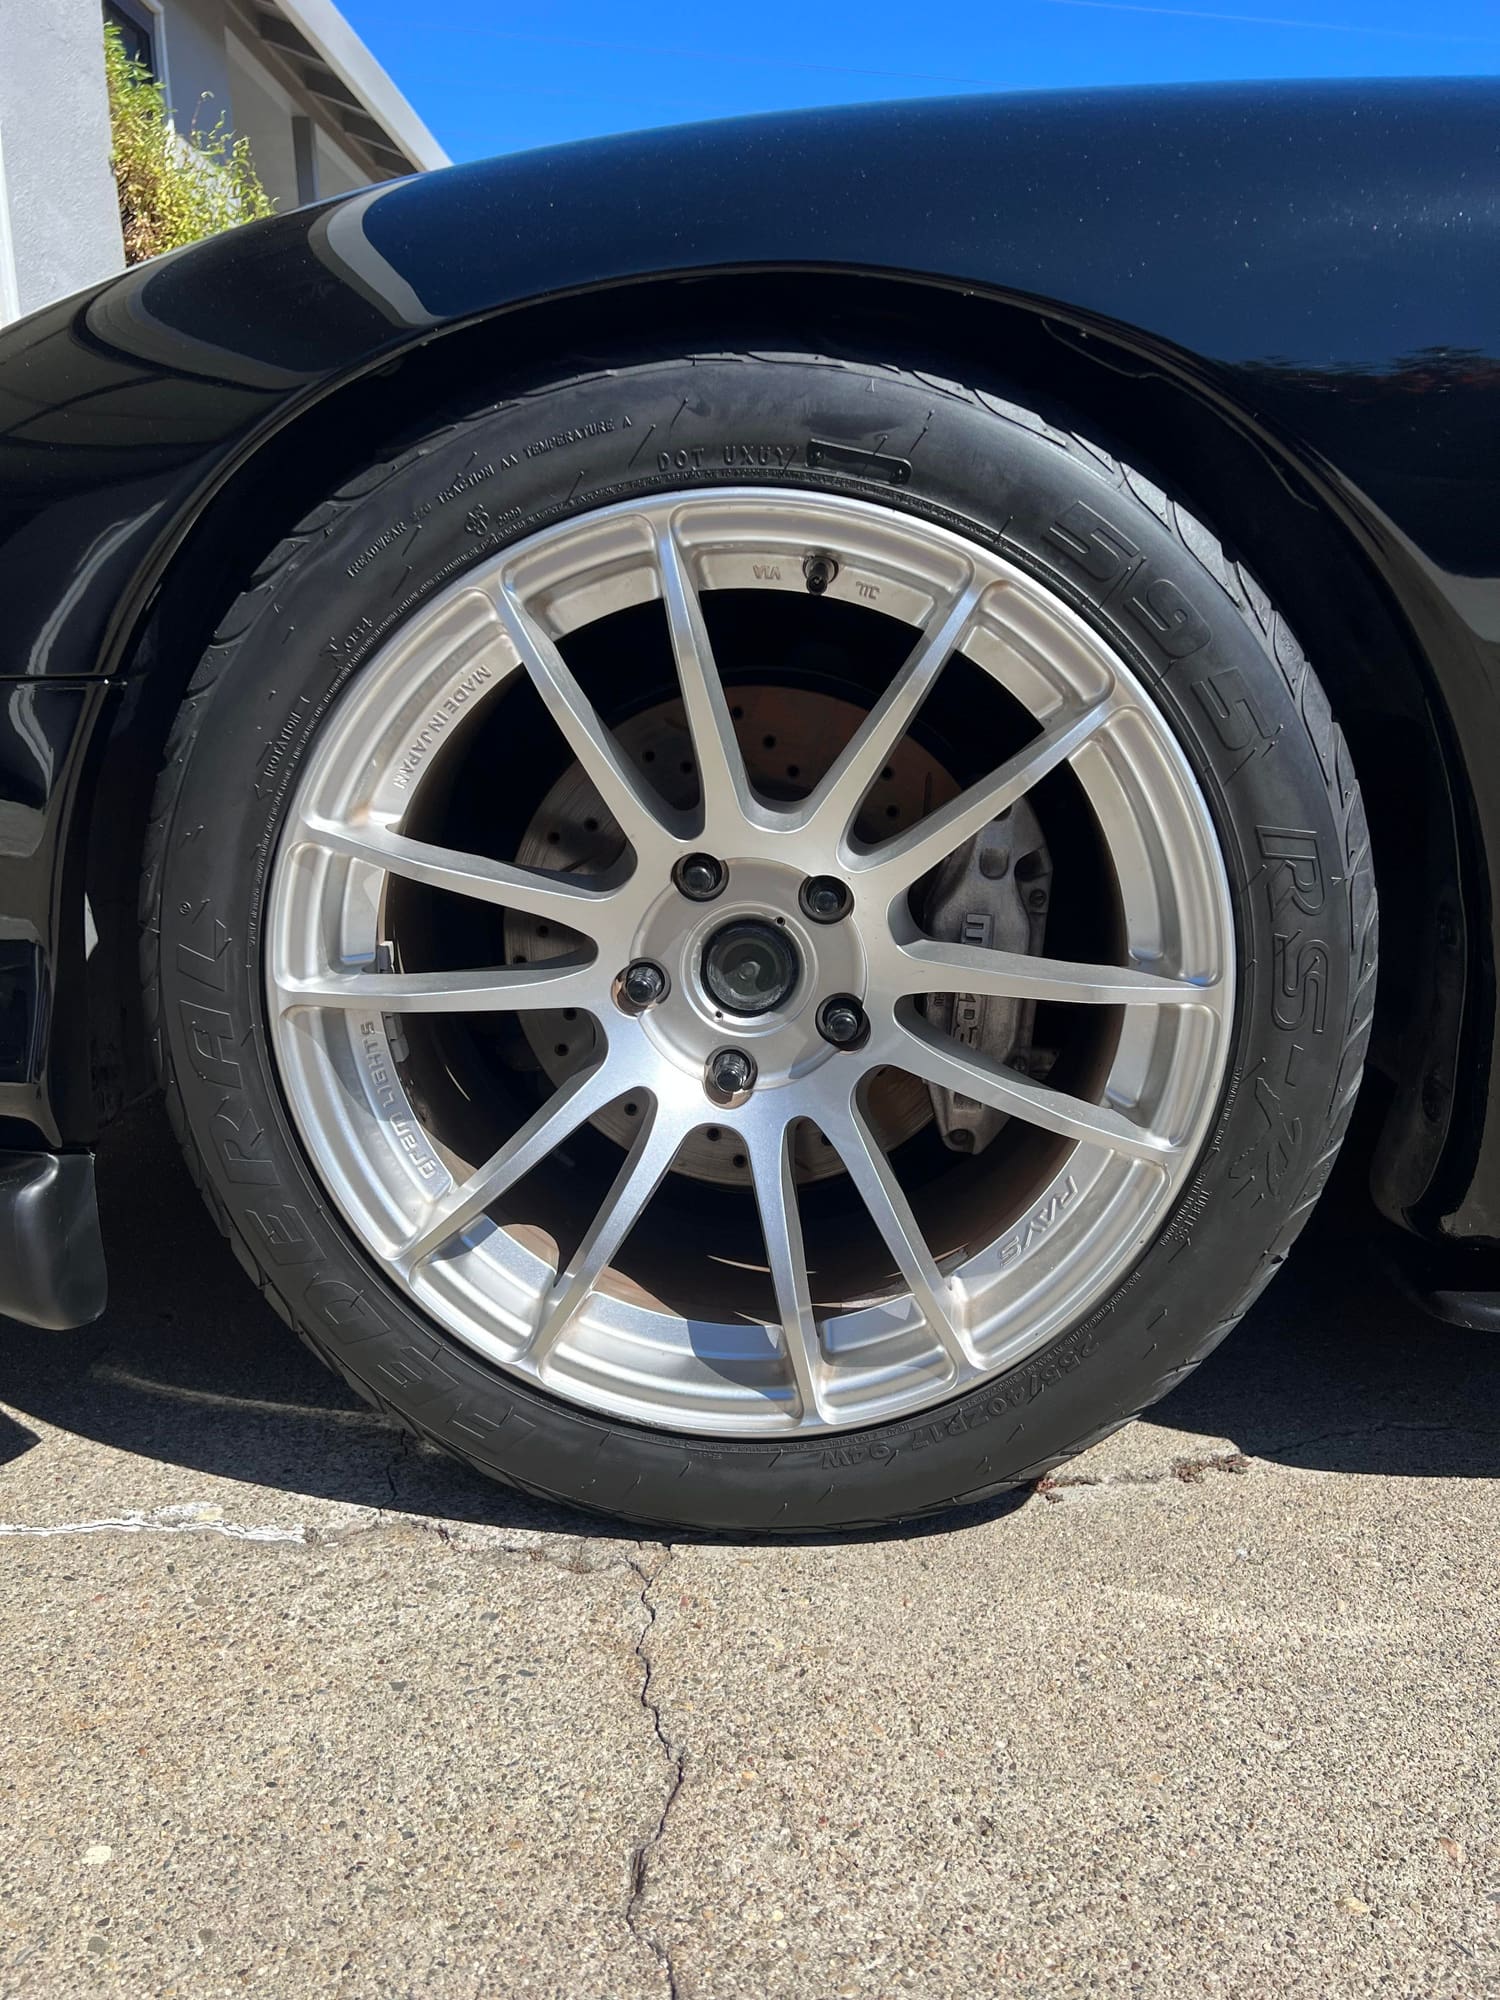 Wheels and Tires/Axles - Gram Lights 57Xtreme 17x9 +40 with 255/40-17 Federal RS-Rs - Used - All Years Any Make All Models - Millbrae, CA 94030, United States